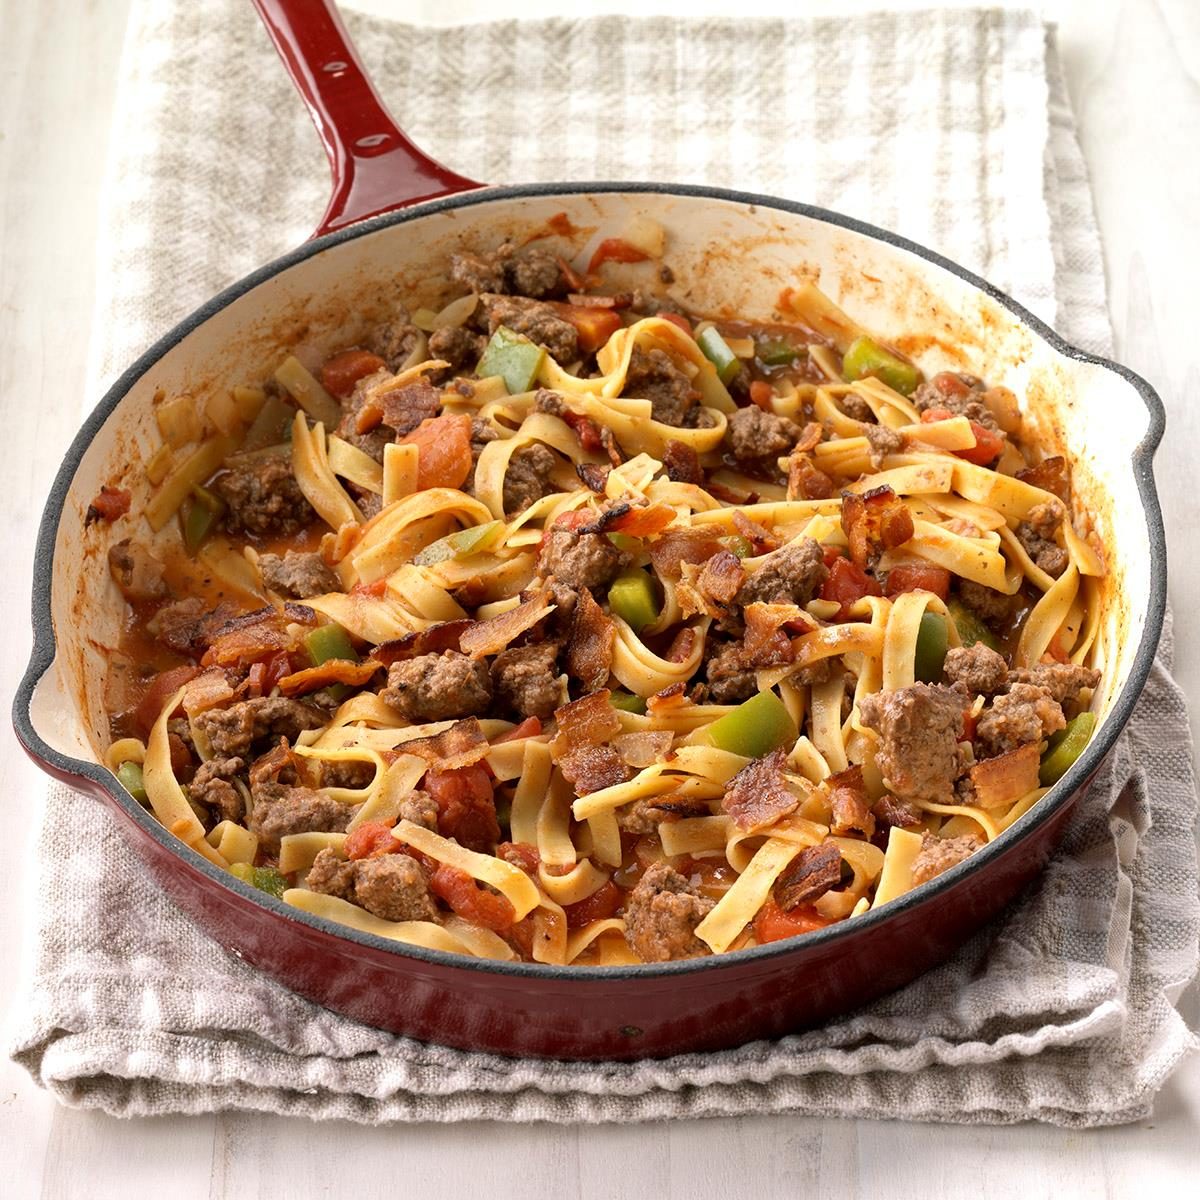 Spanish Noodles And Ground Beef Exps Sdfm18 42886 C10 10 5b 12